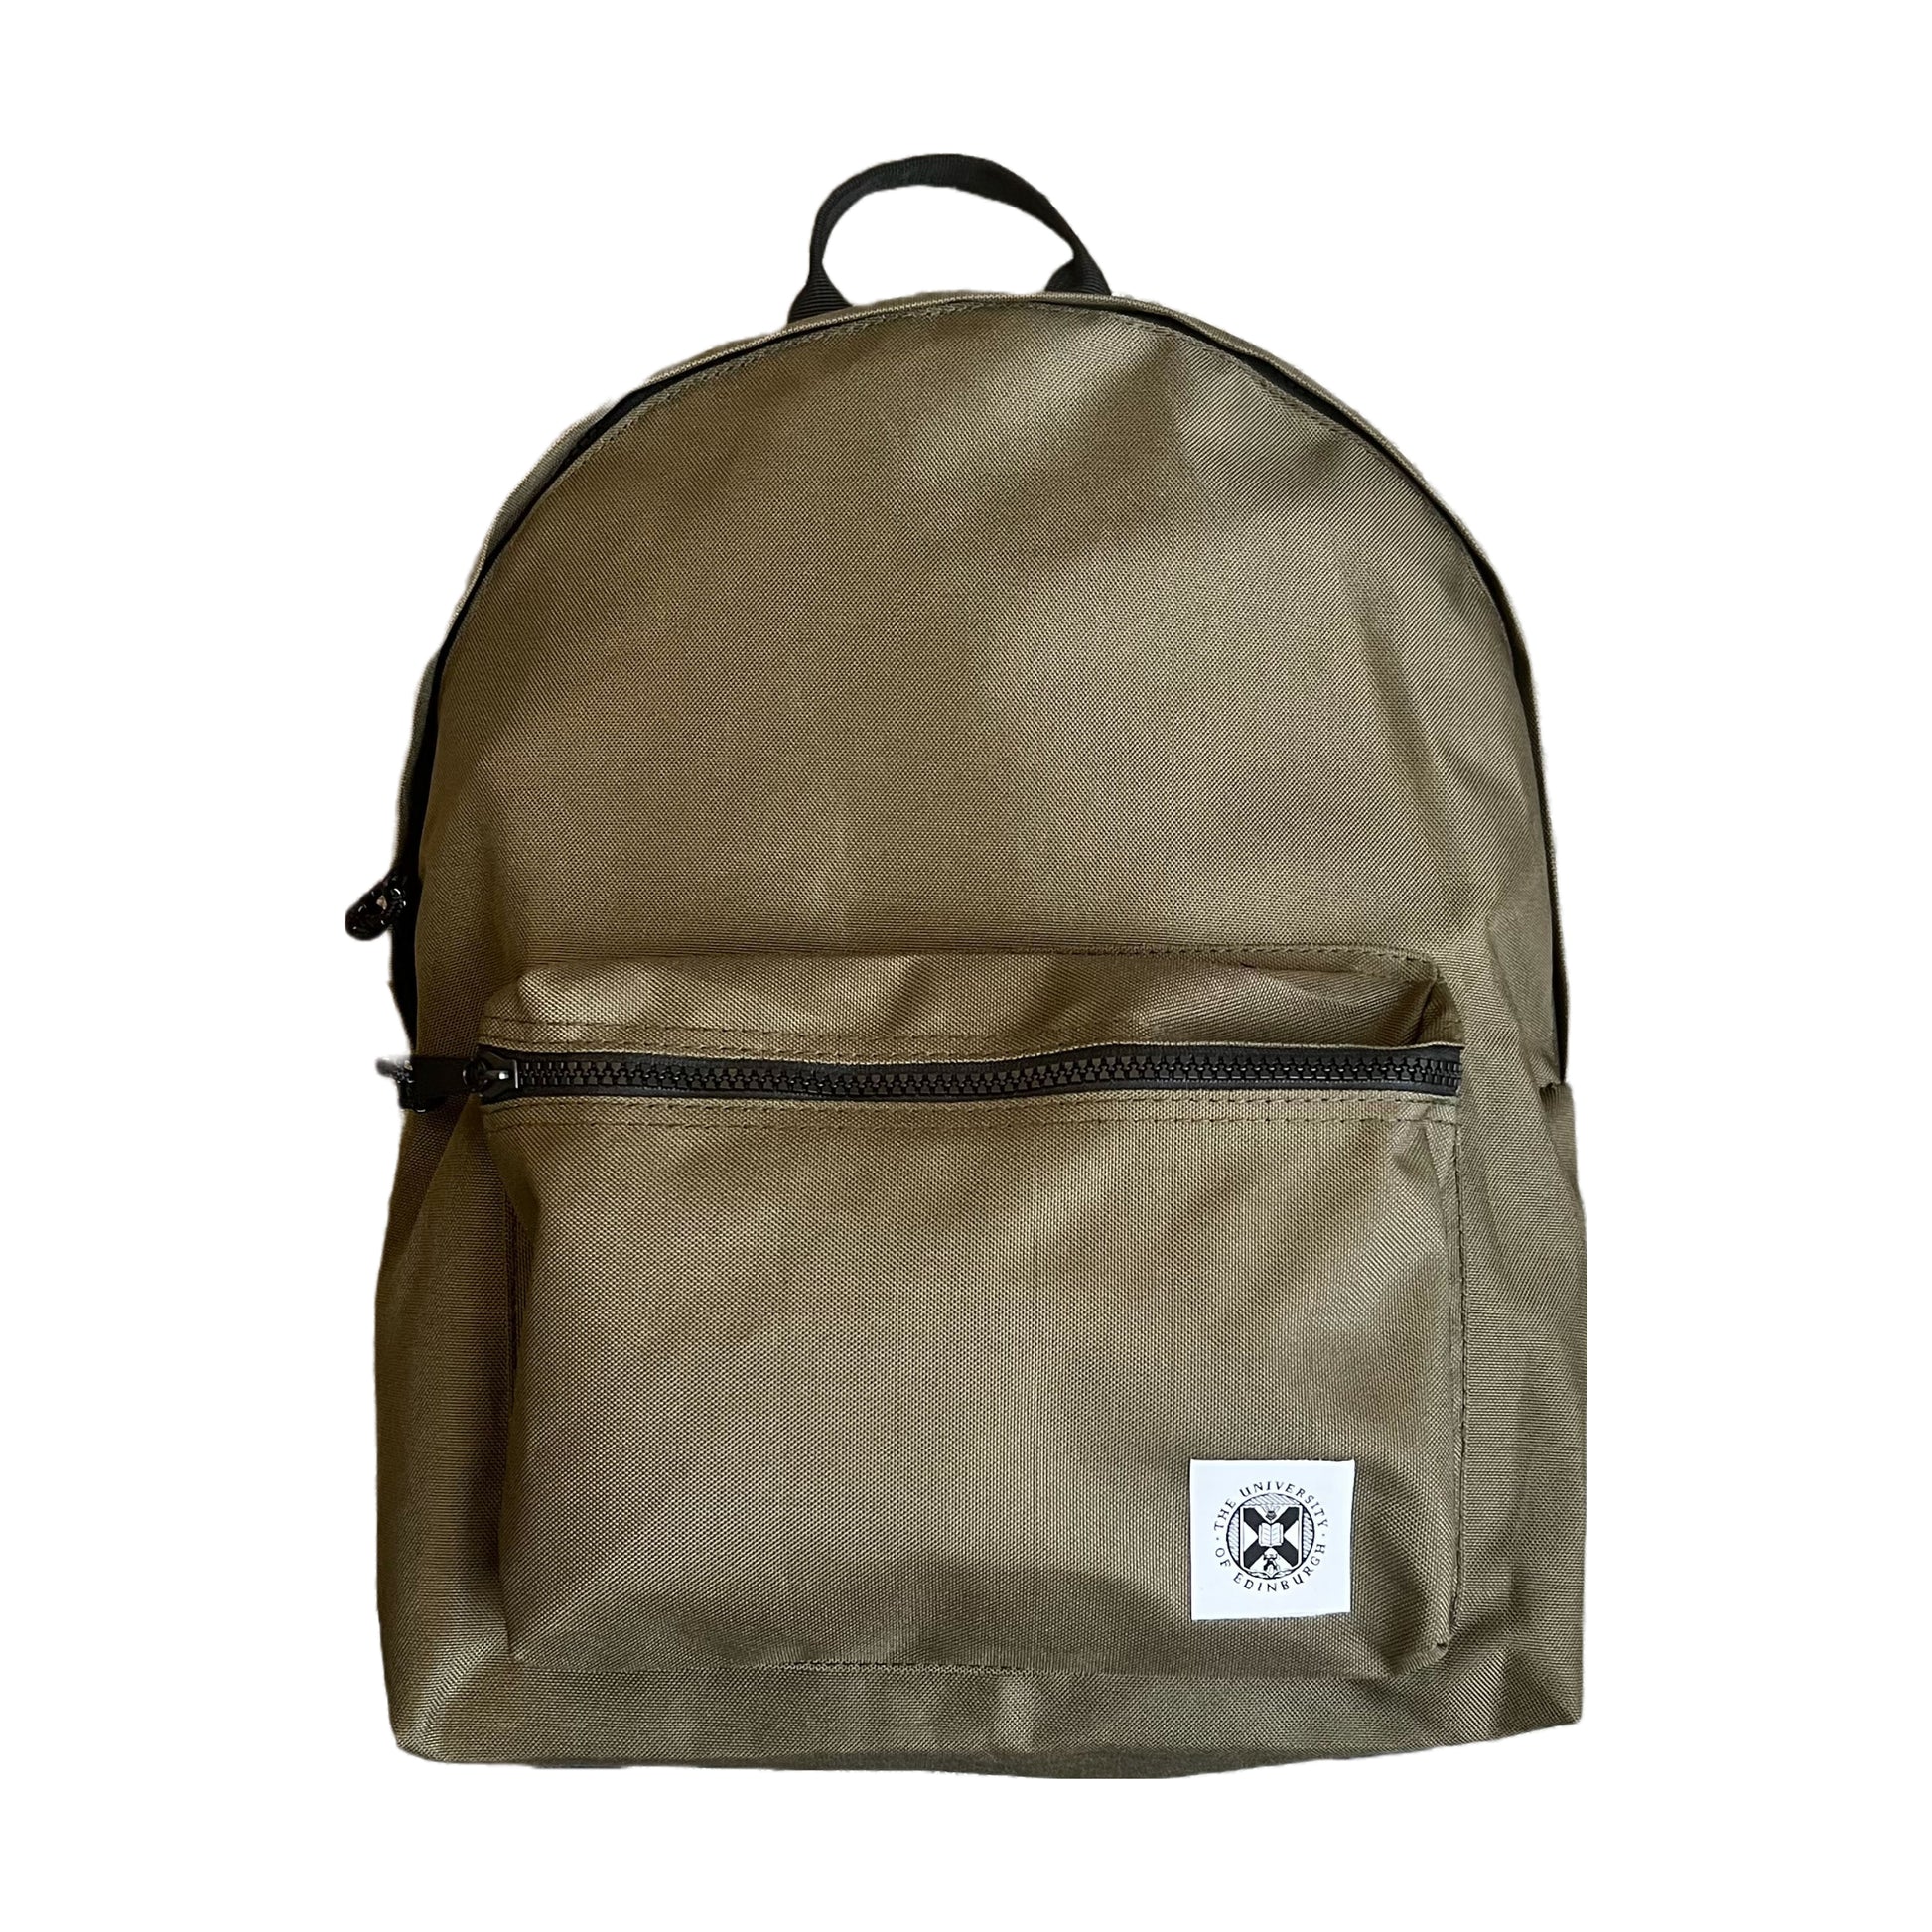 Khaki backpack with a front pouch. It has the University of Edinburgh's crest stitched onto the front pocket.